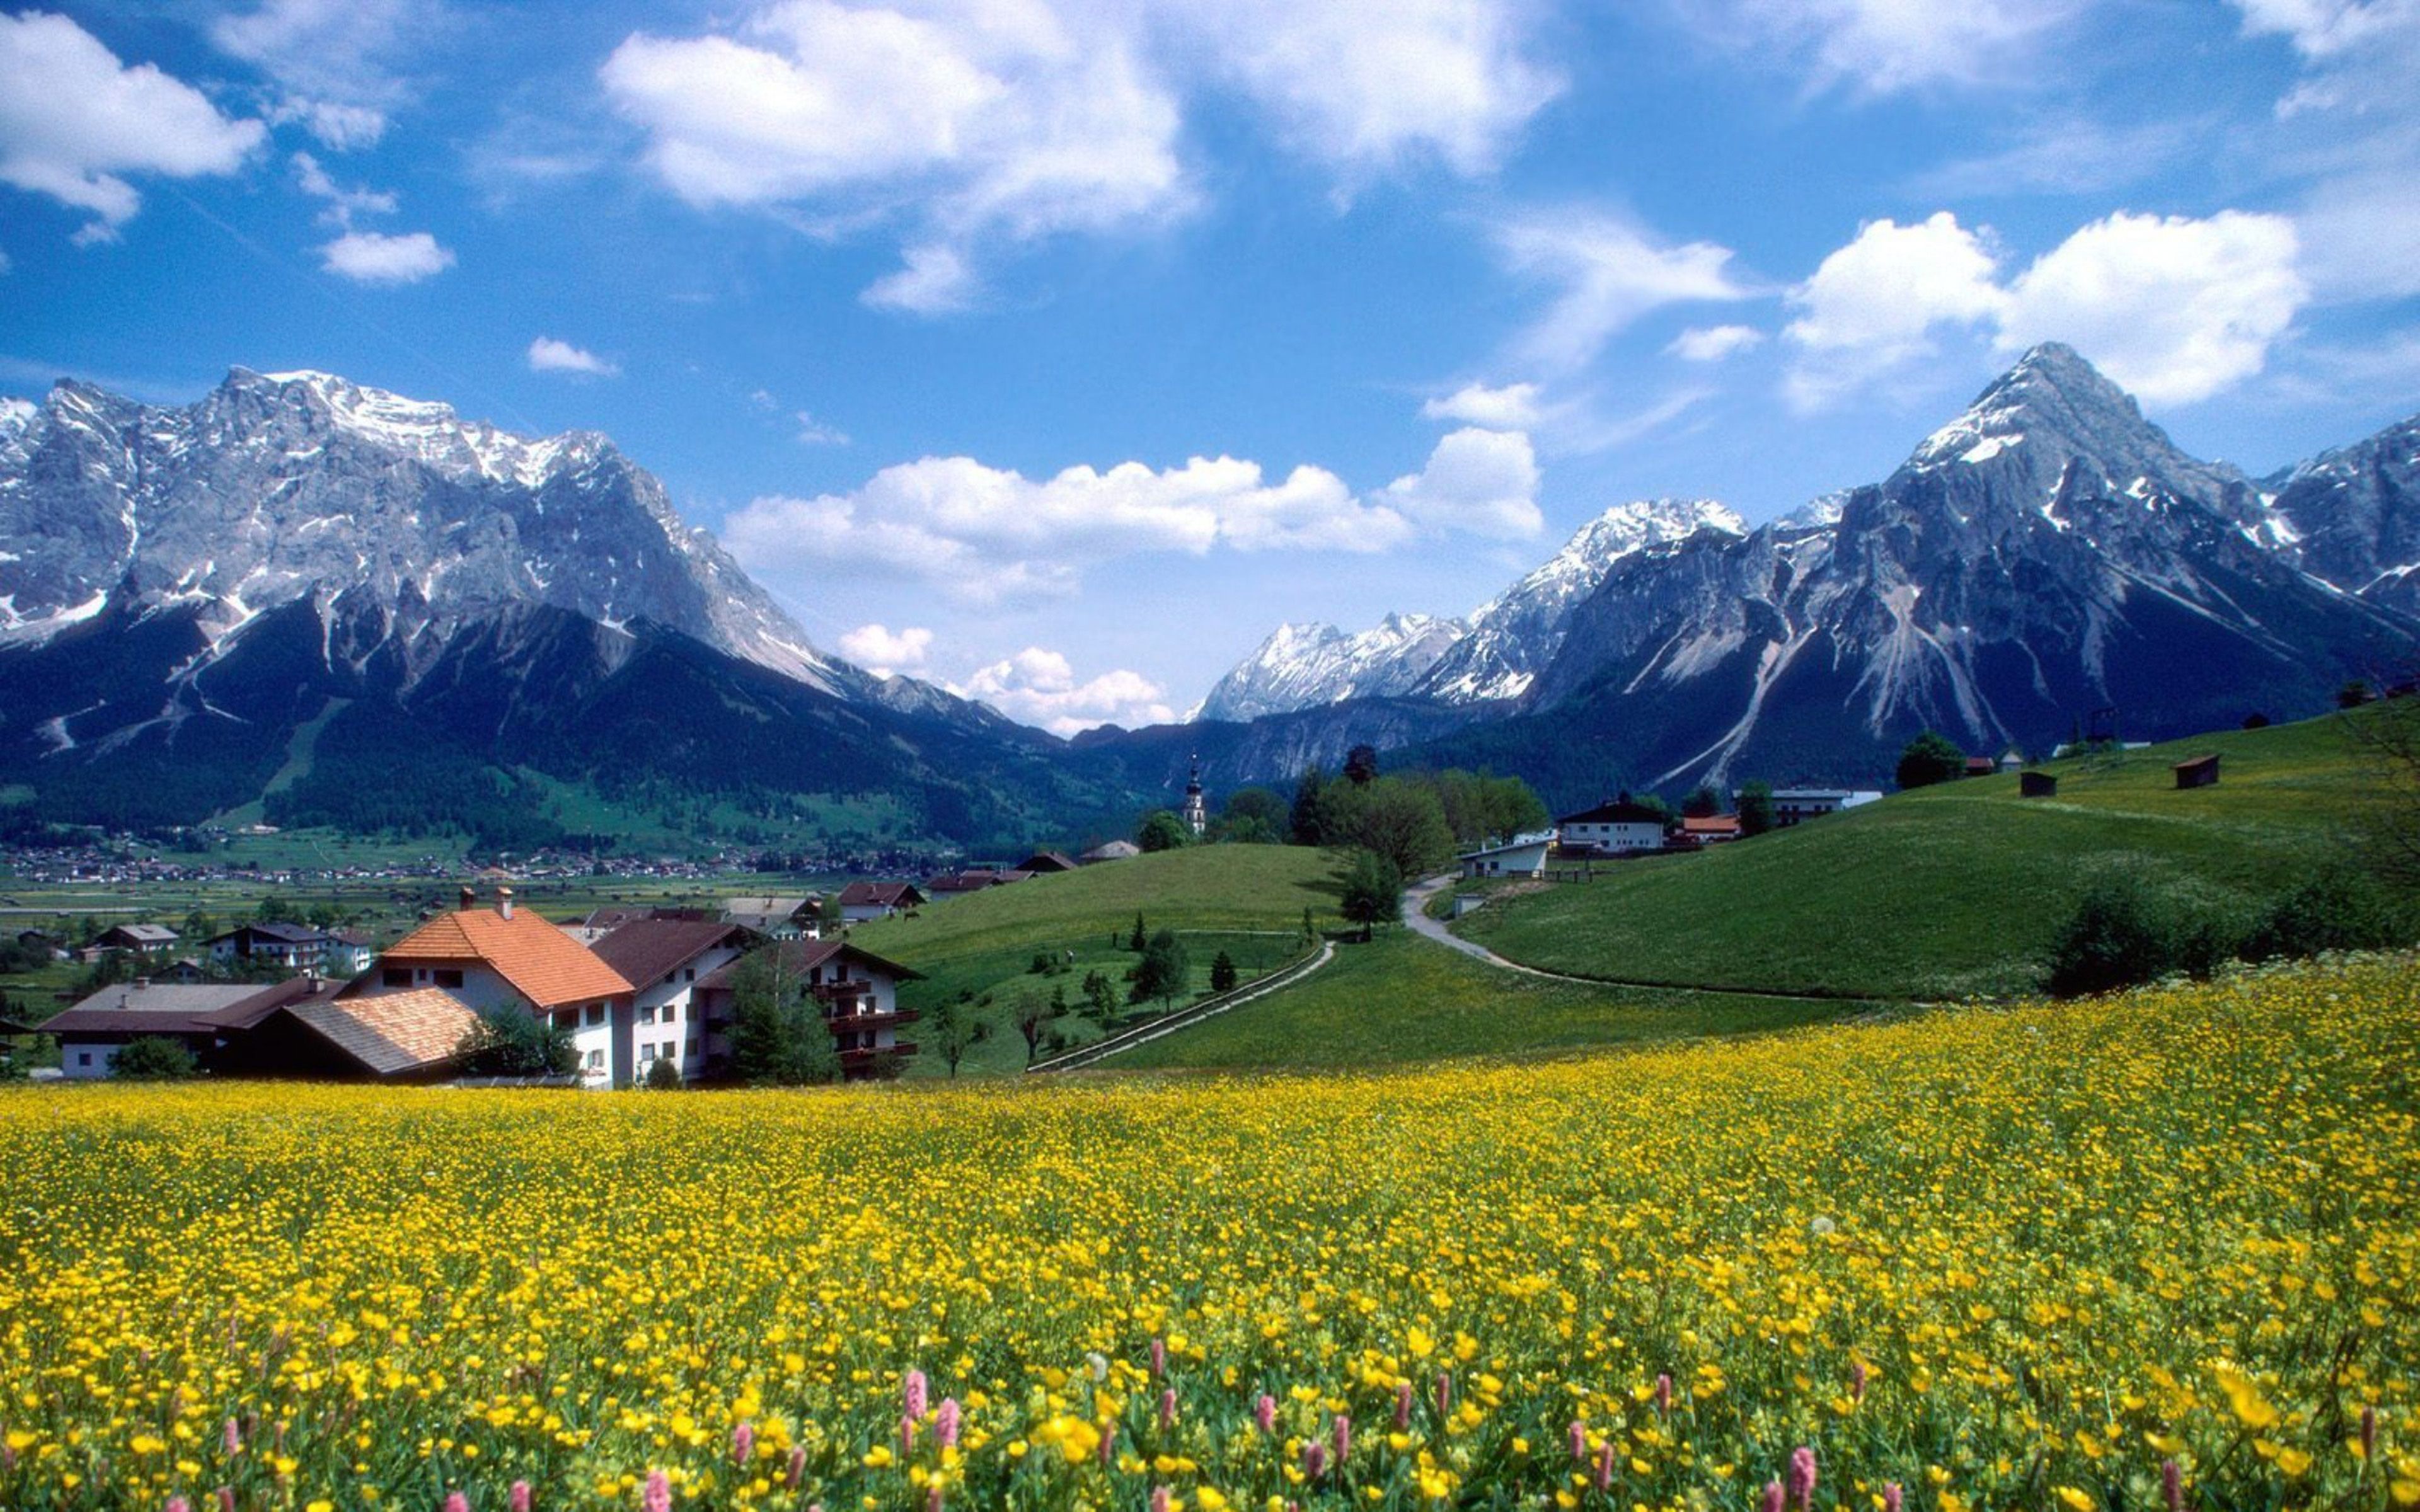 Landscape Spring Mountain Village With Snow Mountains Meadow Flowers Sky HD Wallpaper, Wallpaper13.com